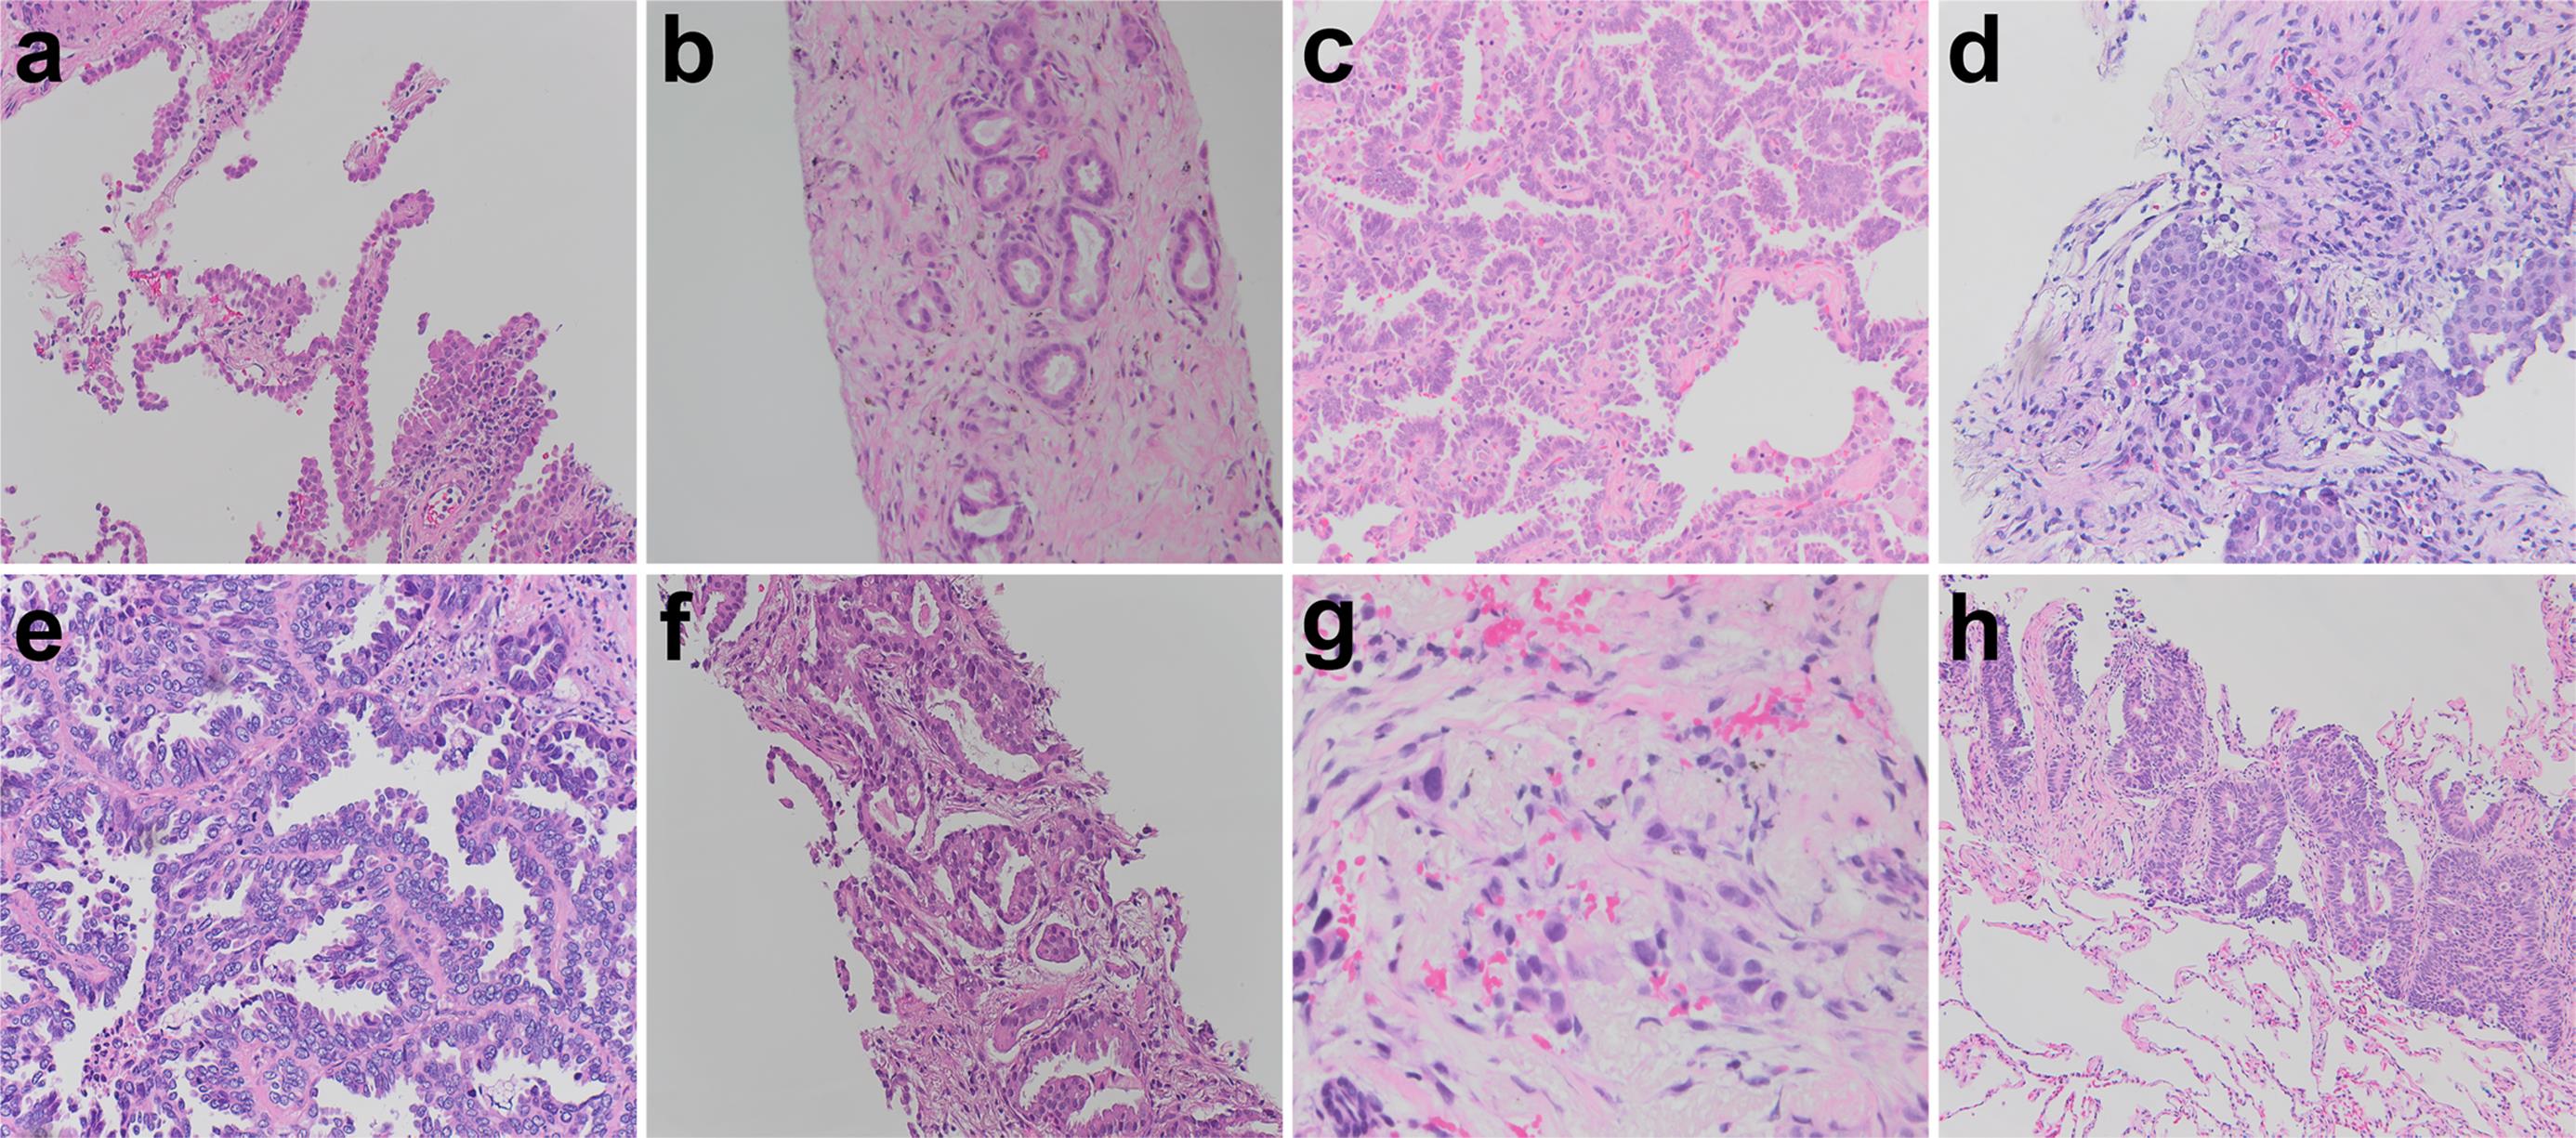 Primary lung adenocarcinoma growth patterns.